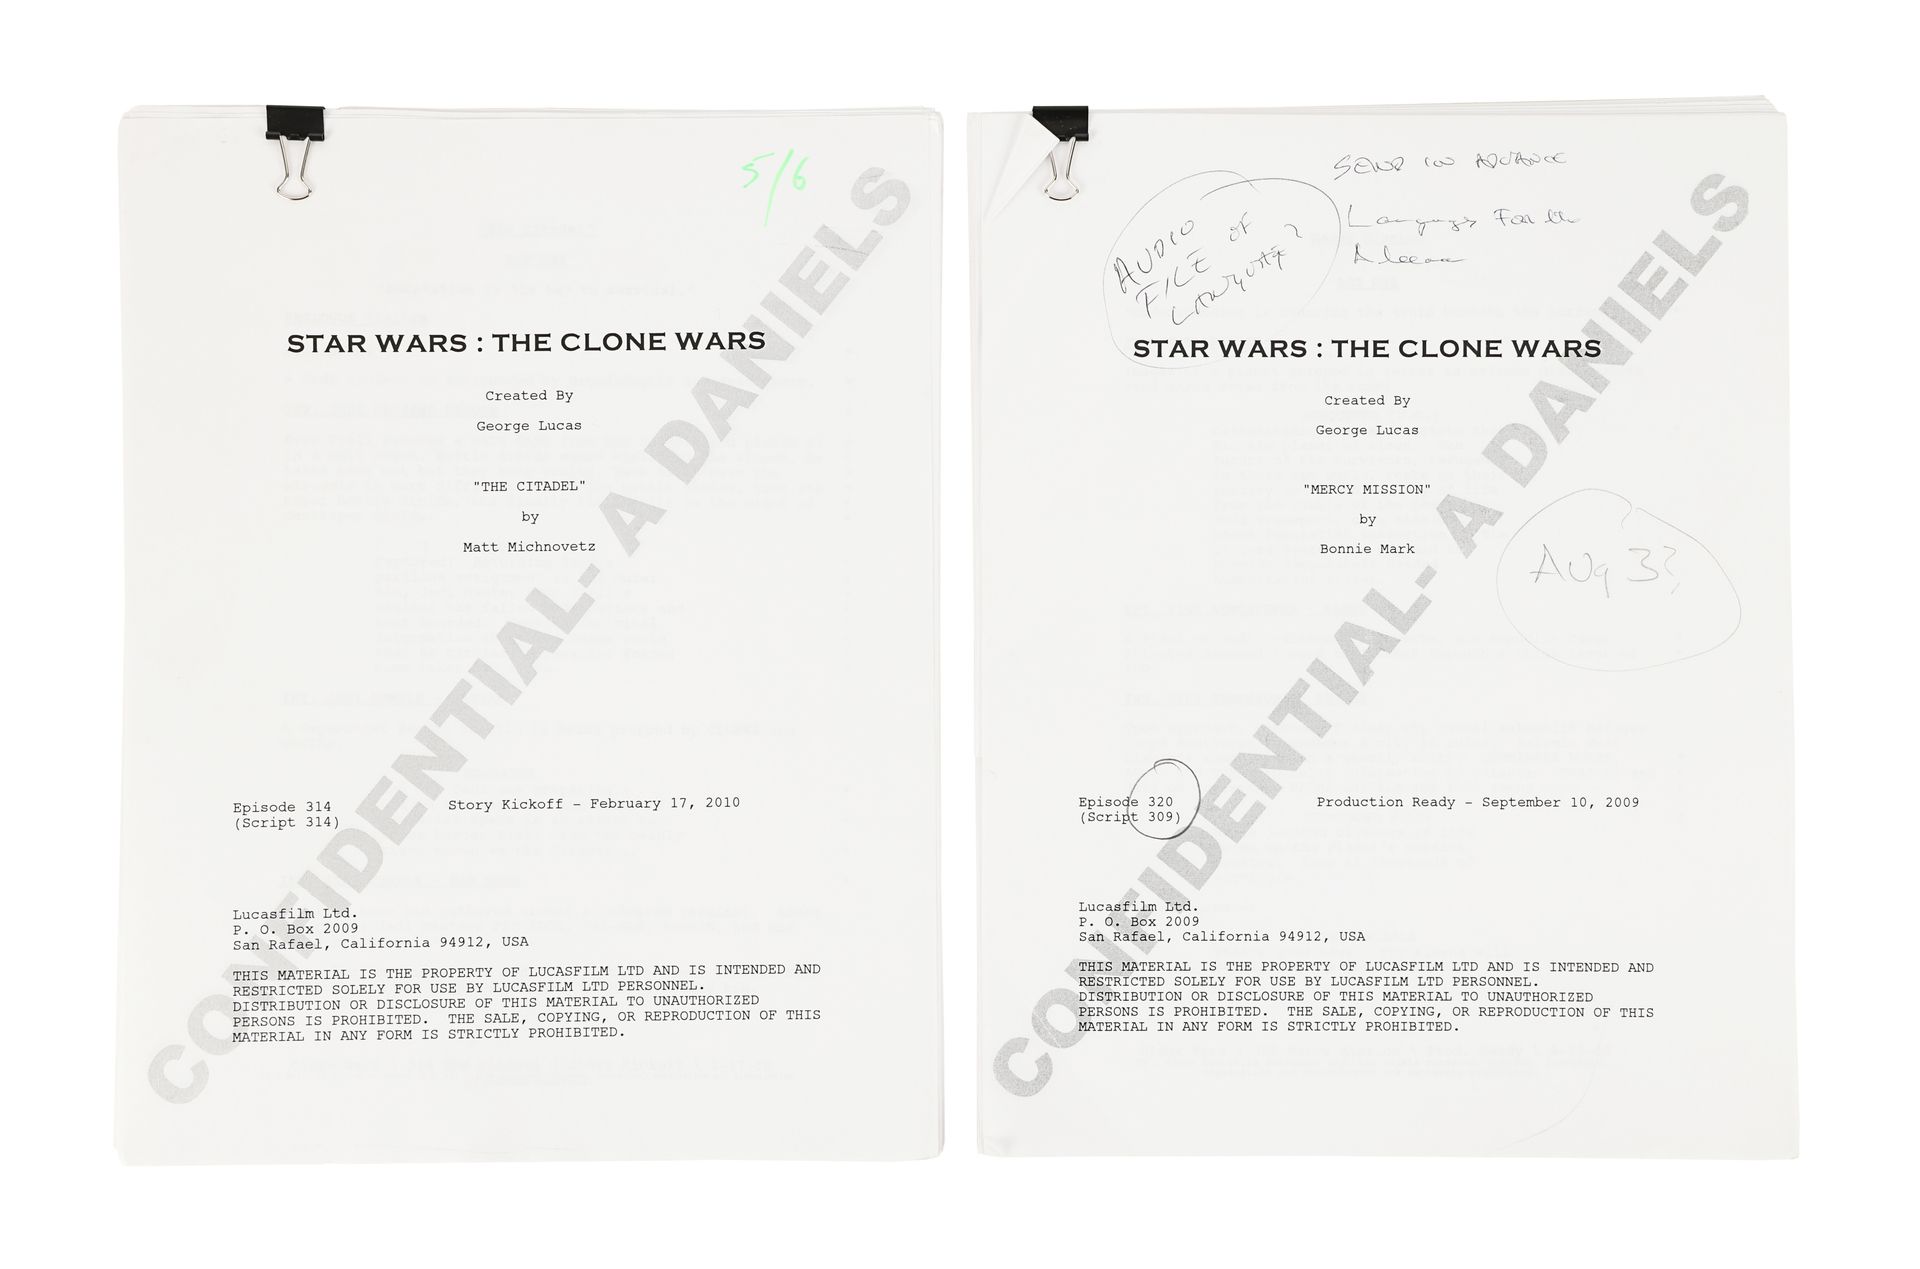 STAR WARS: THE CLONE WARS (2008-2020) - Anthony Daniels Collection: Pair of Anthony Daniels' Scripts